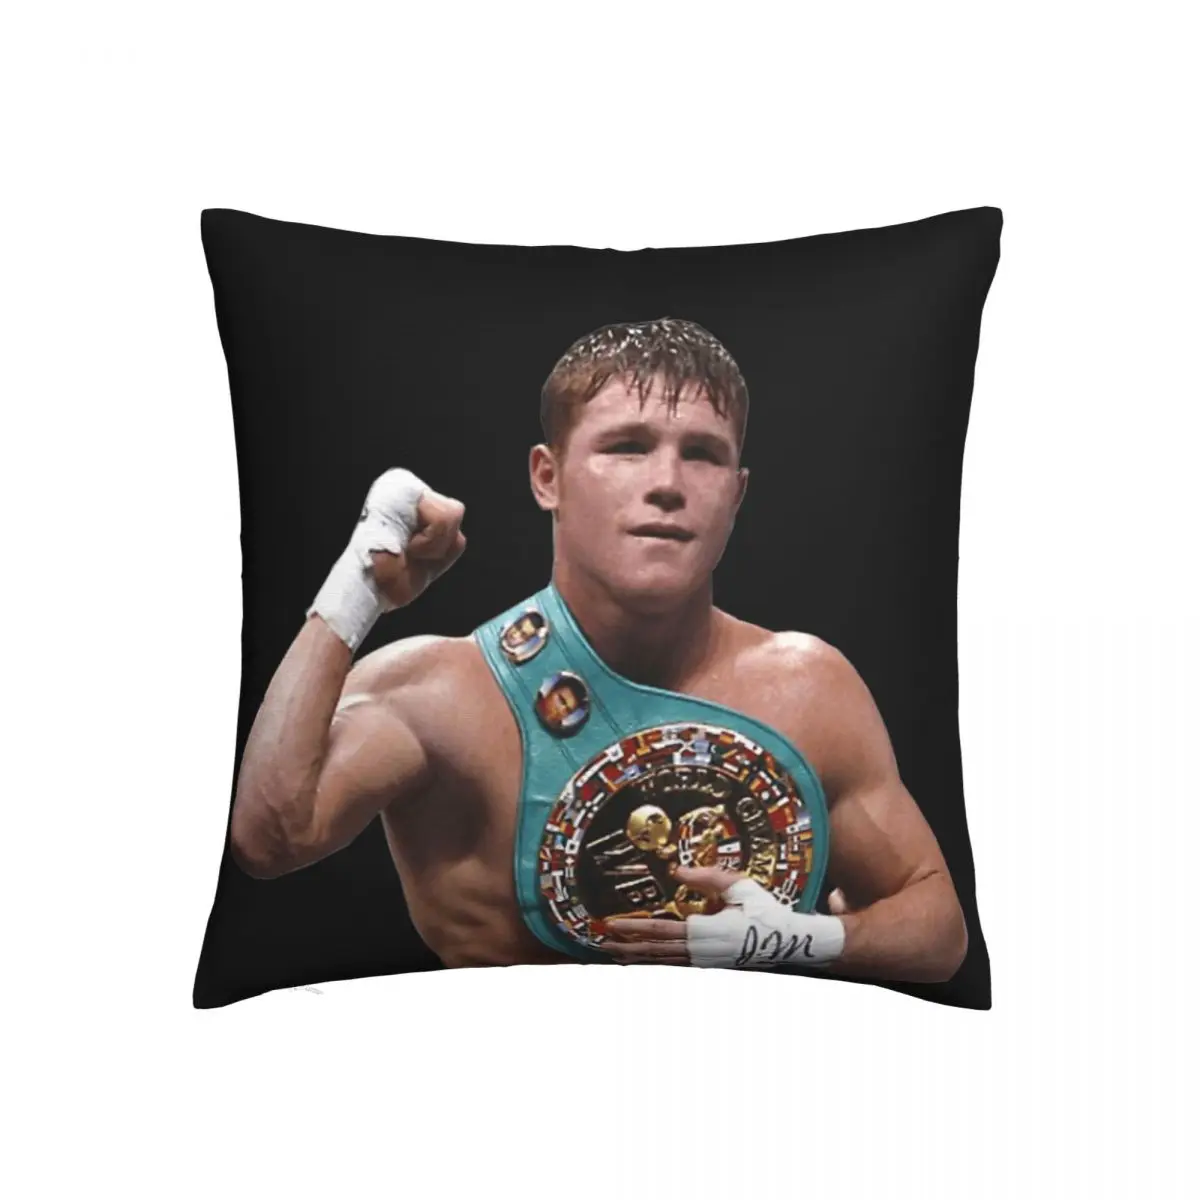 

Square Pillow Saul Canelos Alvarez Boxing Classic Graphic R257 Weeping Willow Square Pillow Print Humor Graphic Rest